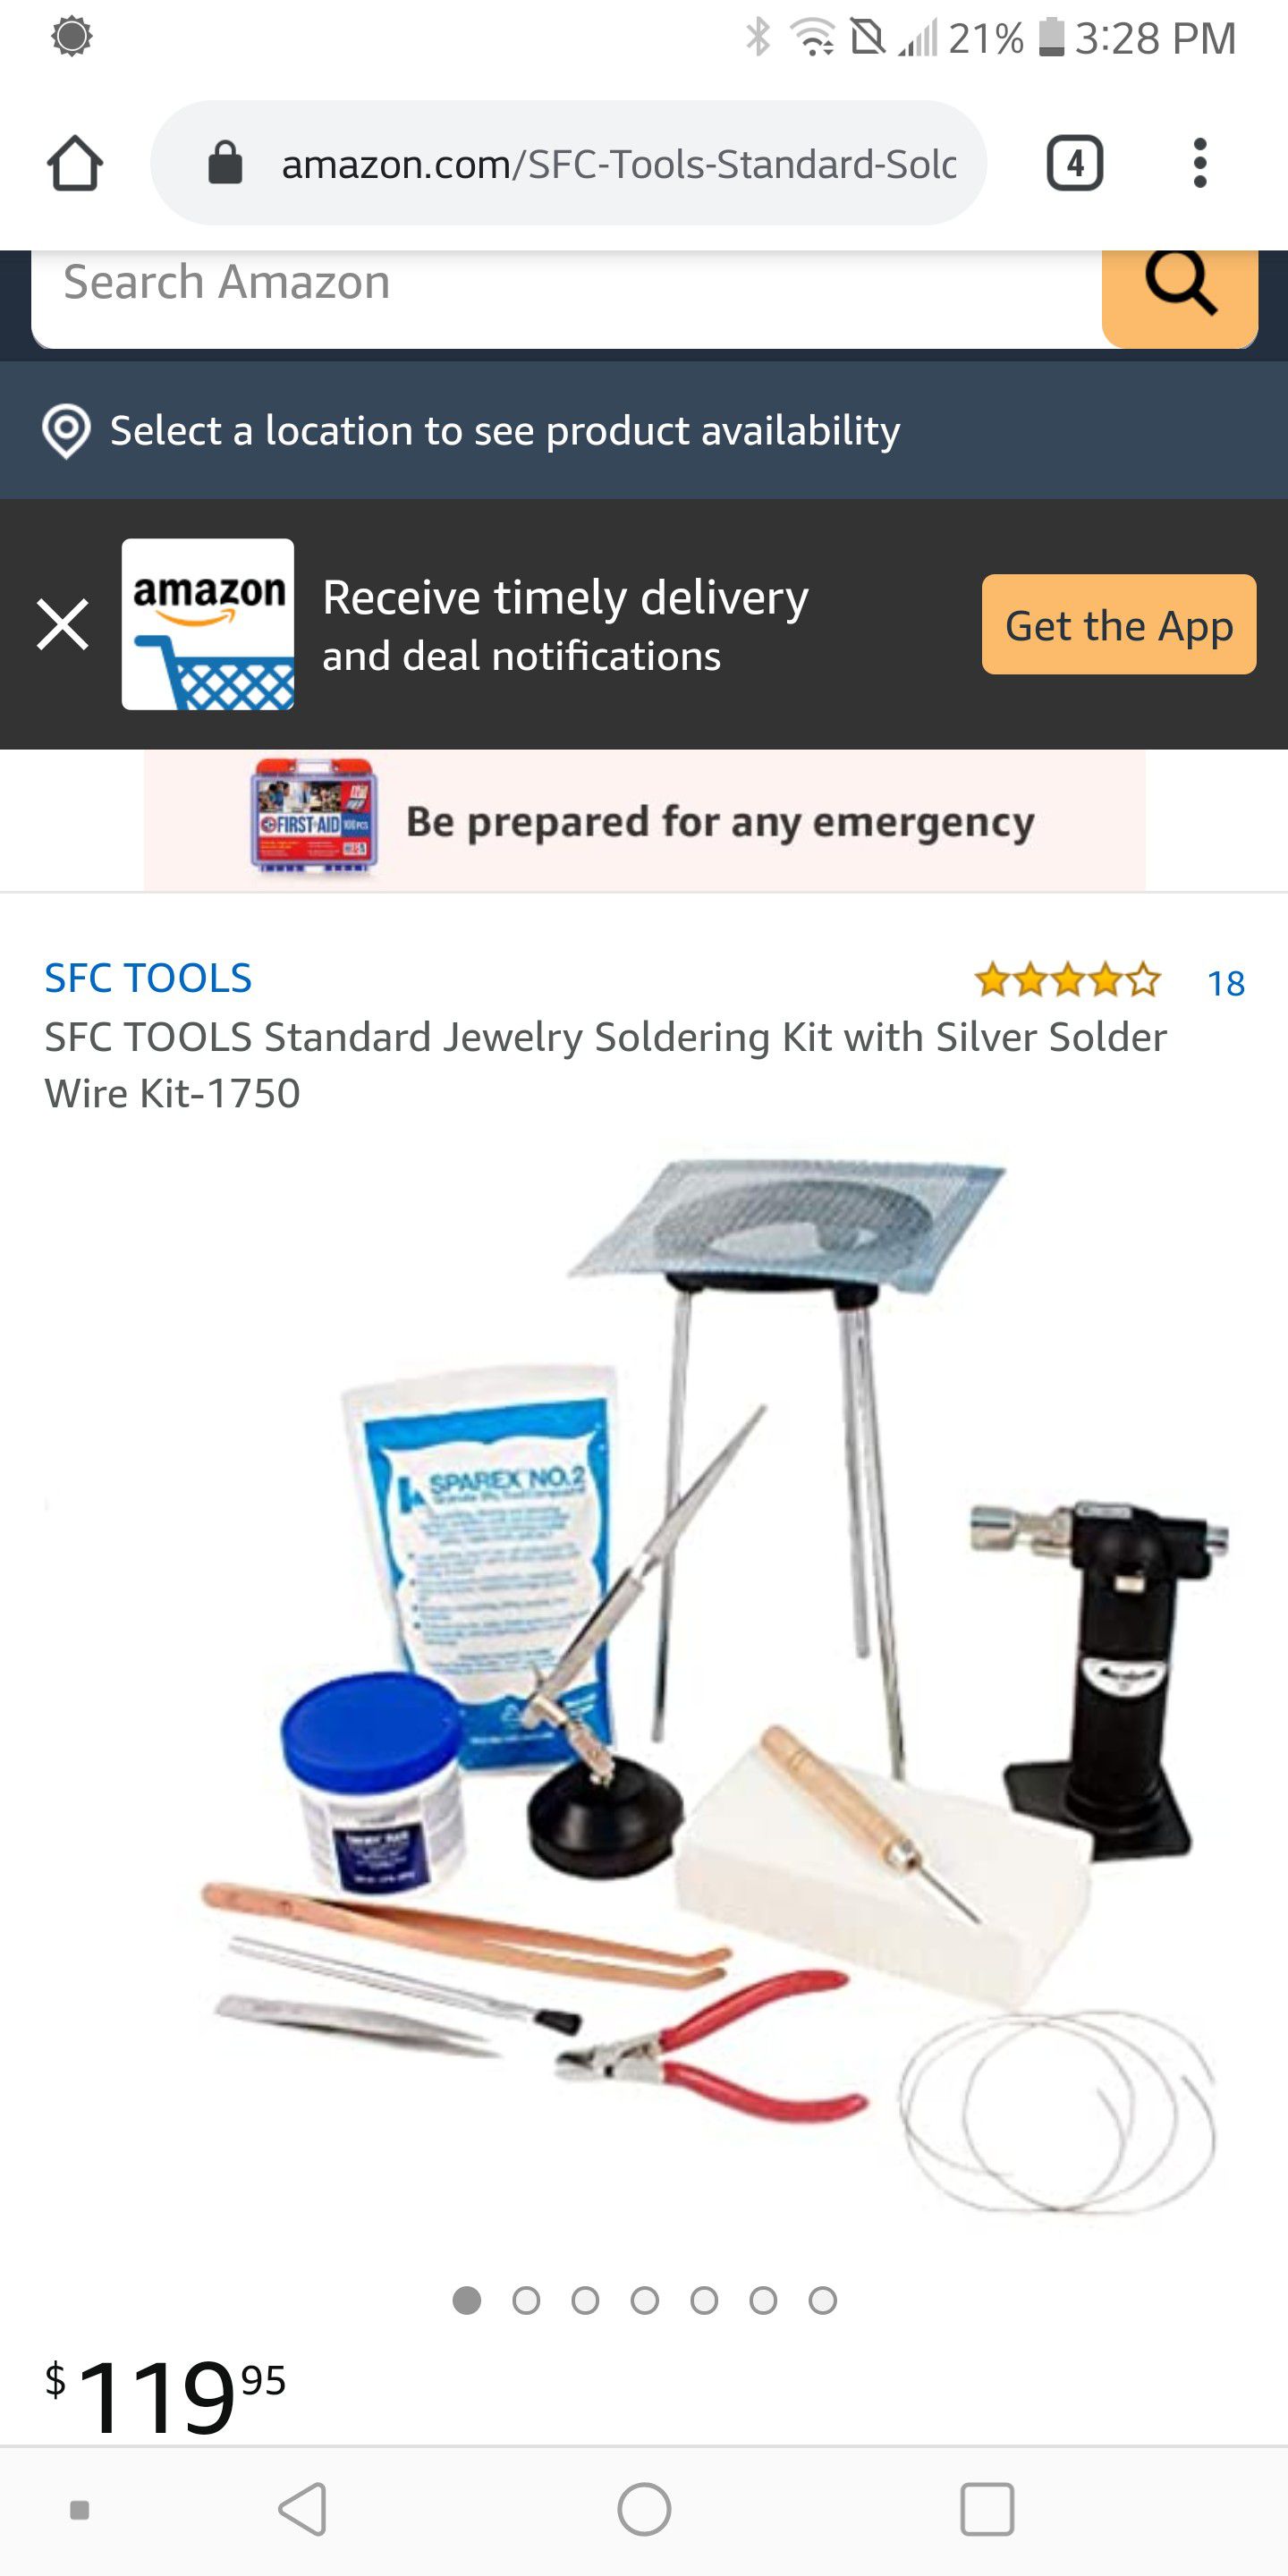 SFC TOOLS Standard Jewelry Soldering Kit with Silver Solder Wire Kit-1750